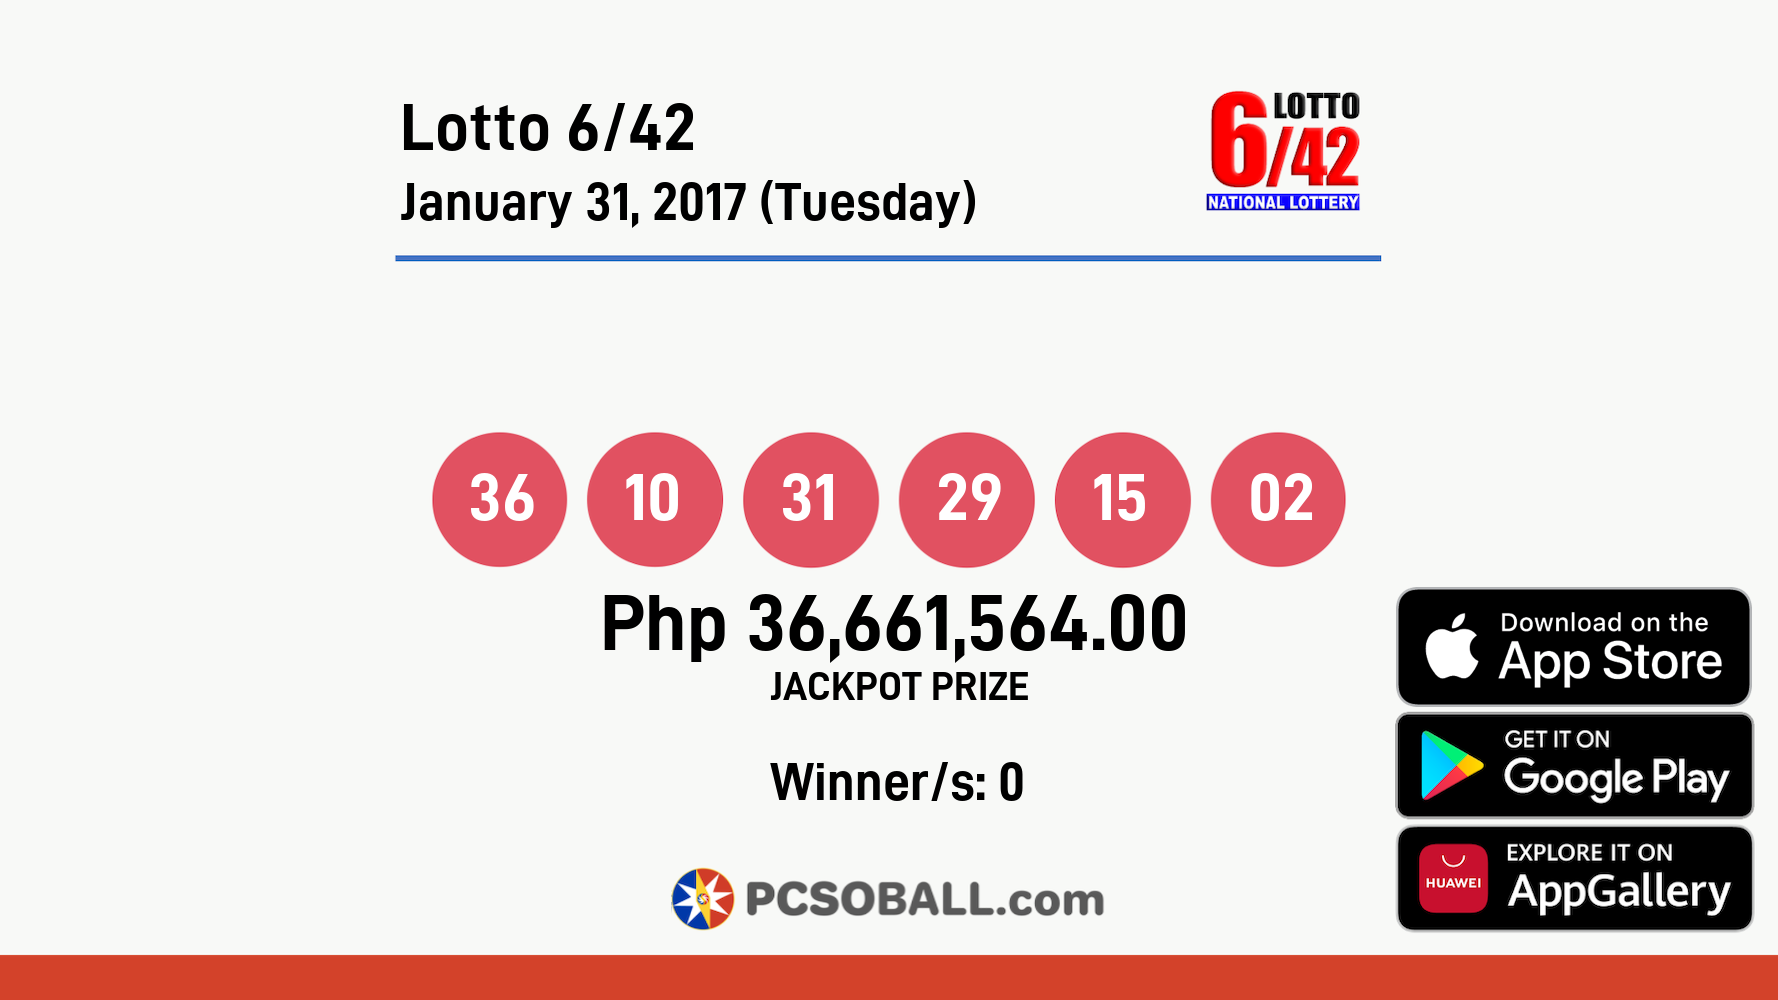 Lotto 6/42 January 31, 2017 (Tuesday) Result